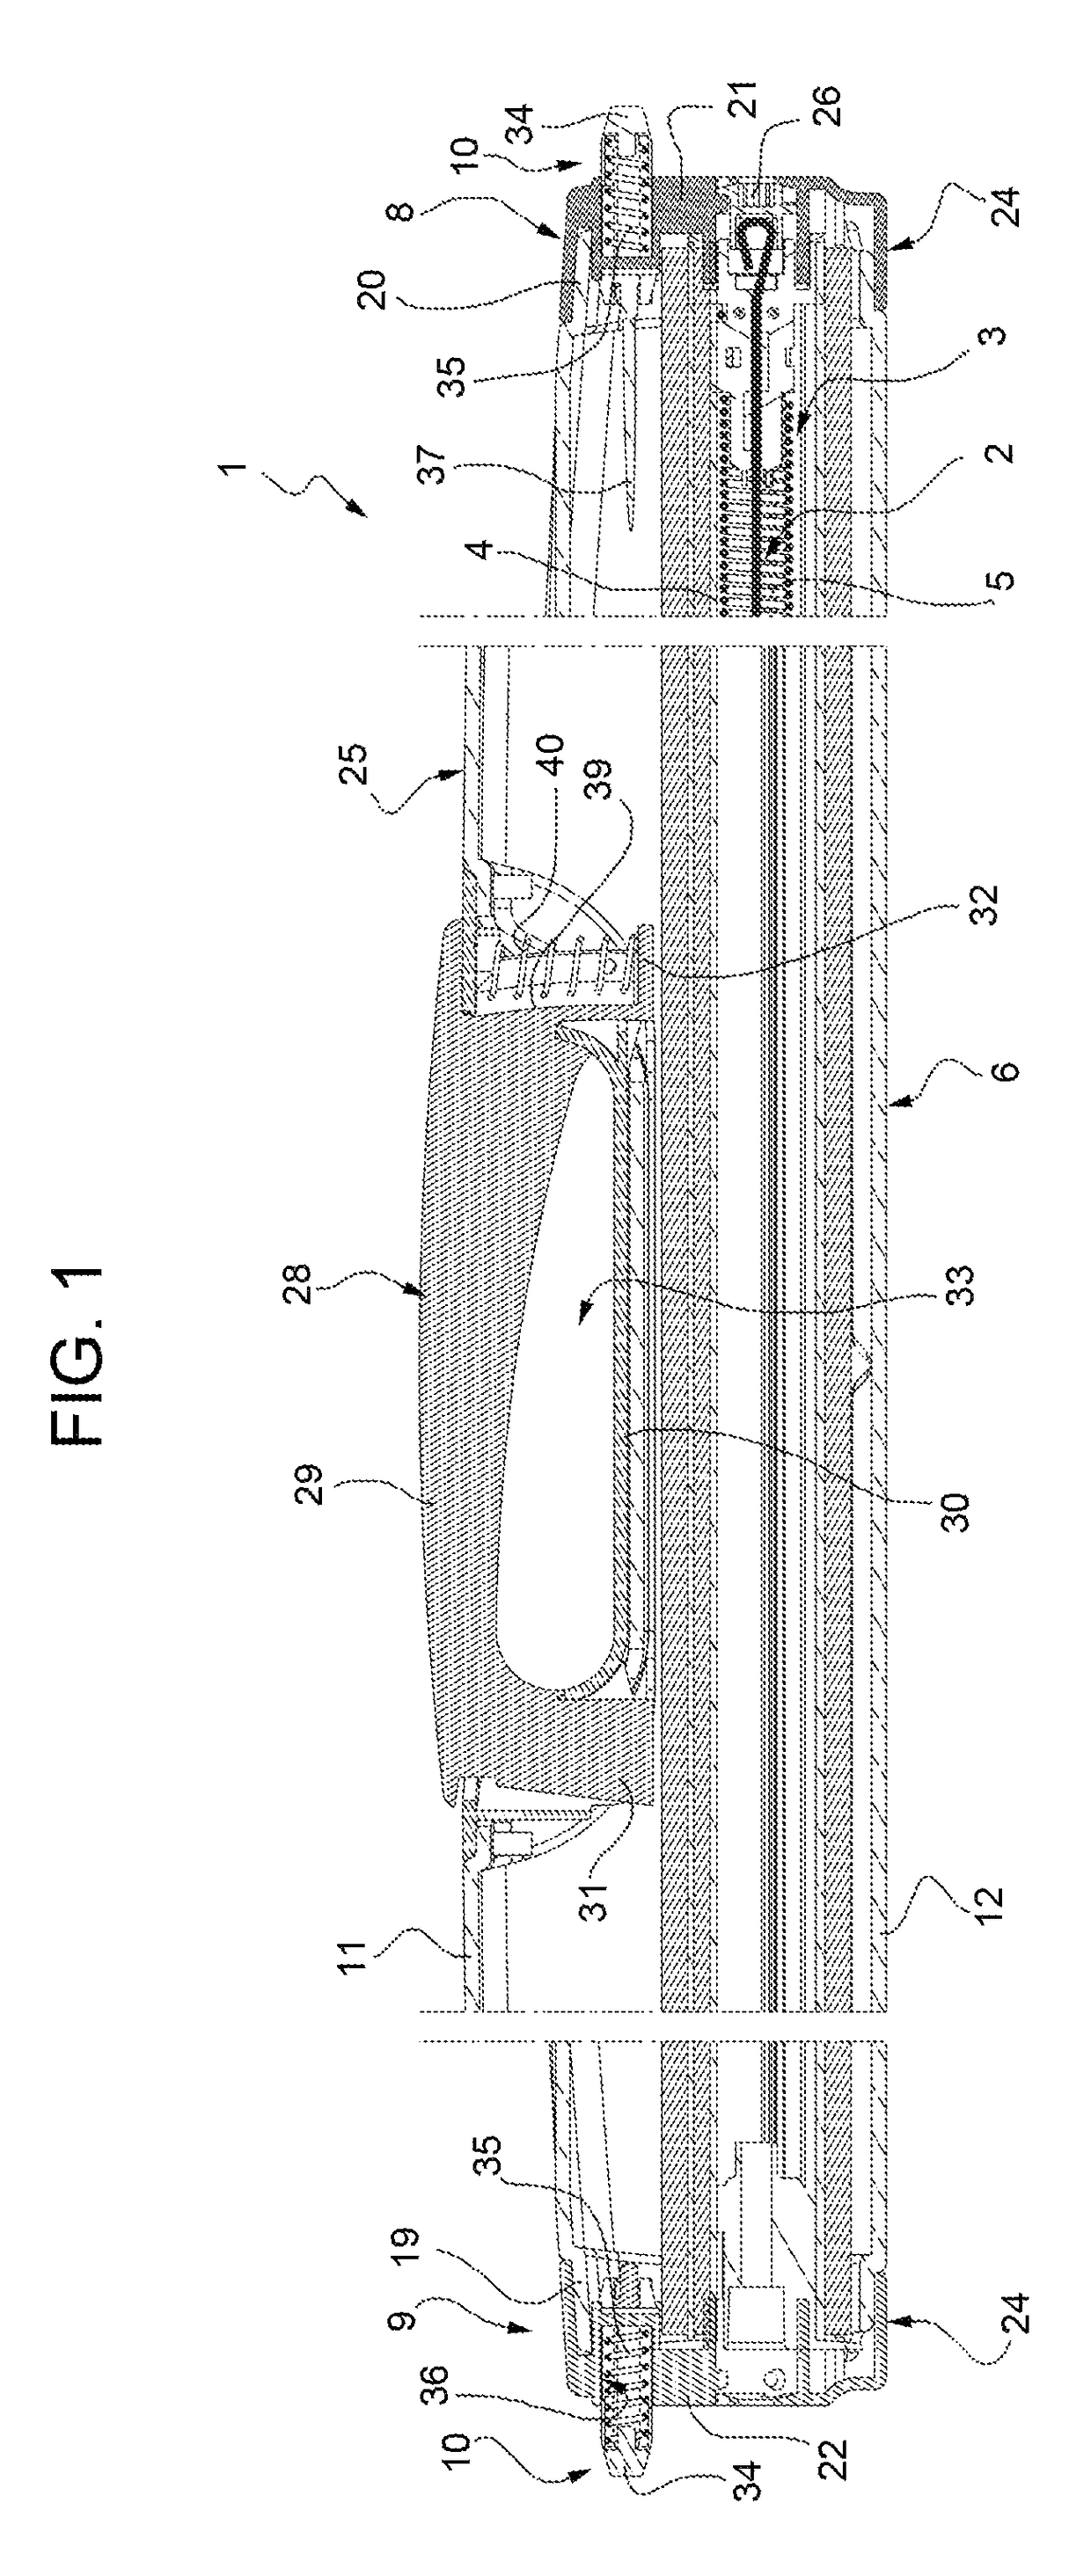 Holder of a tonneau cover or separation device for a luggage space of a vehicle